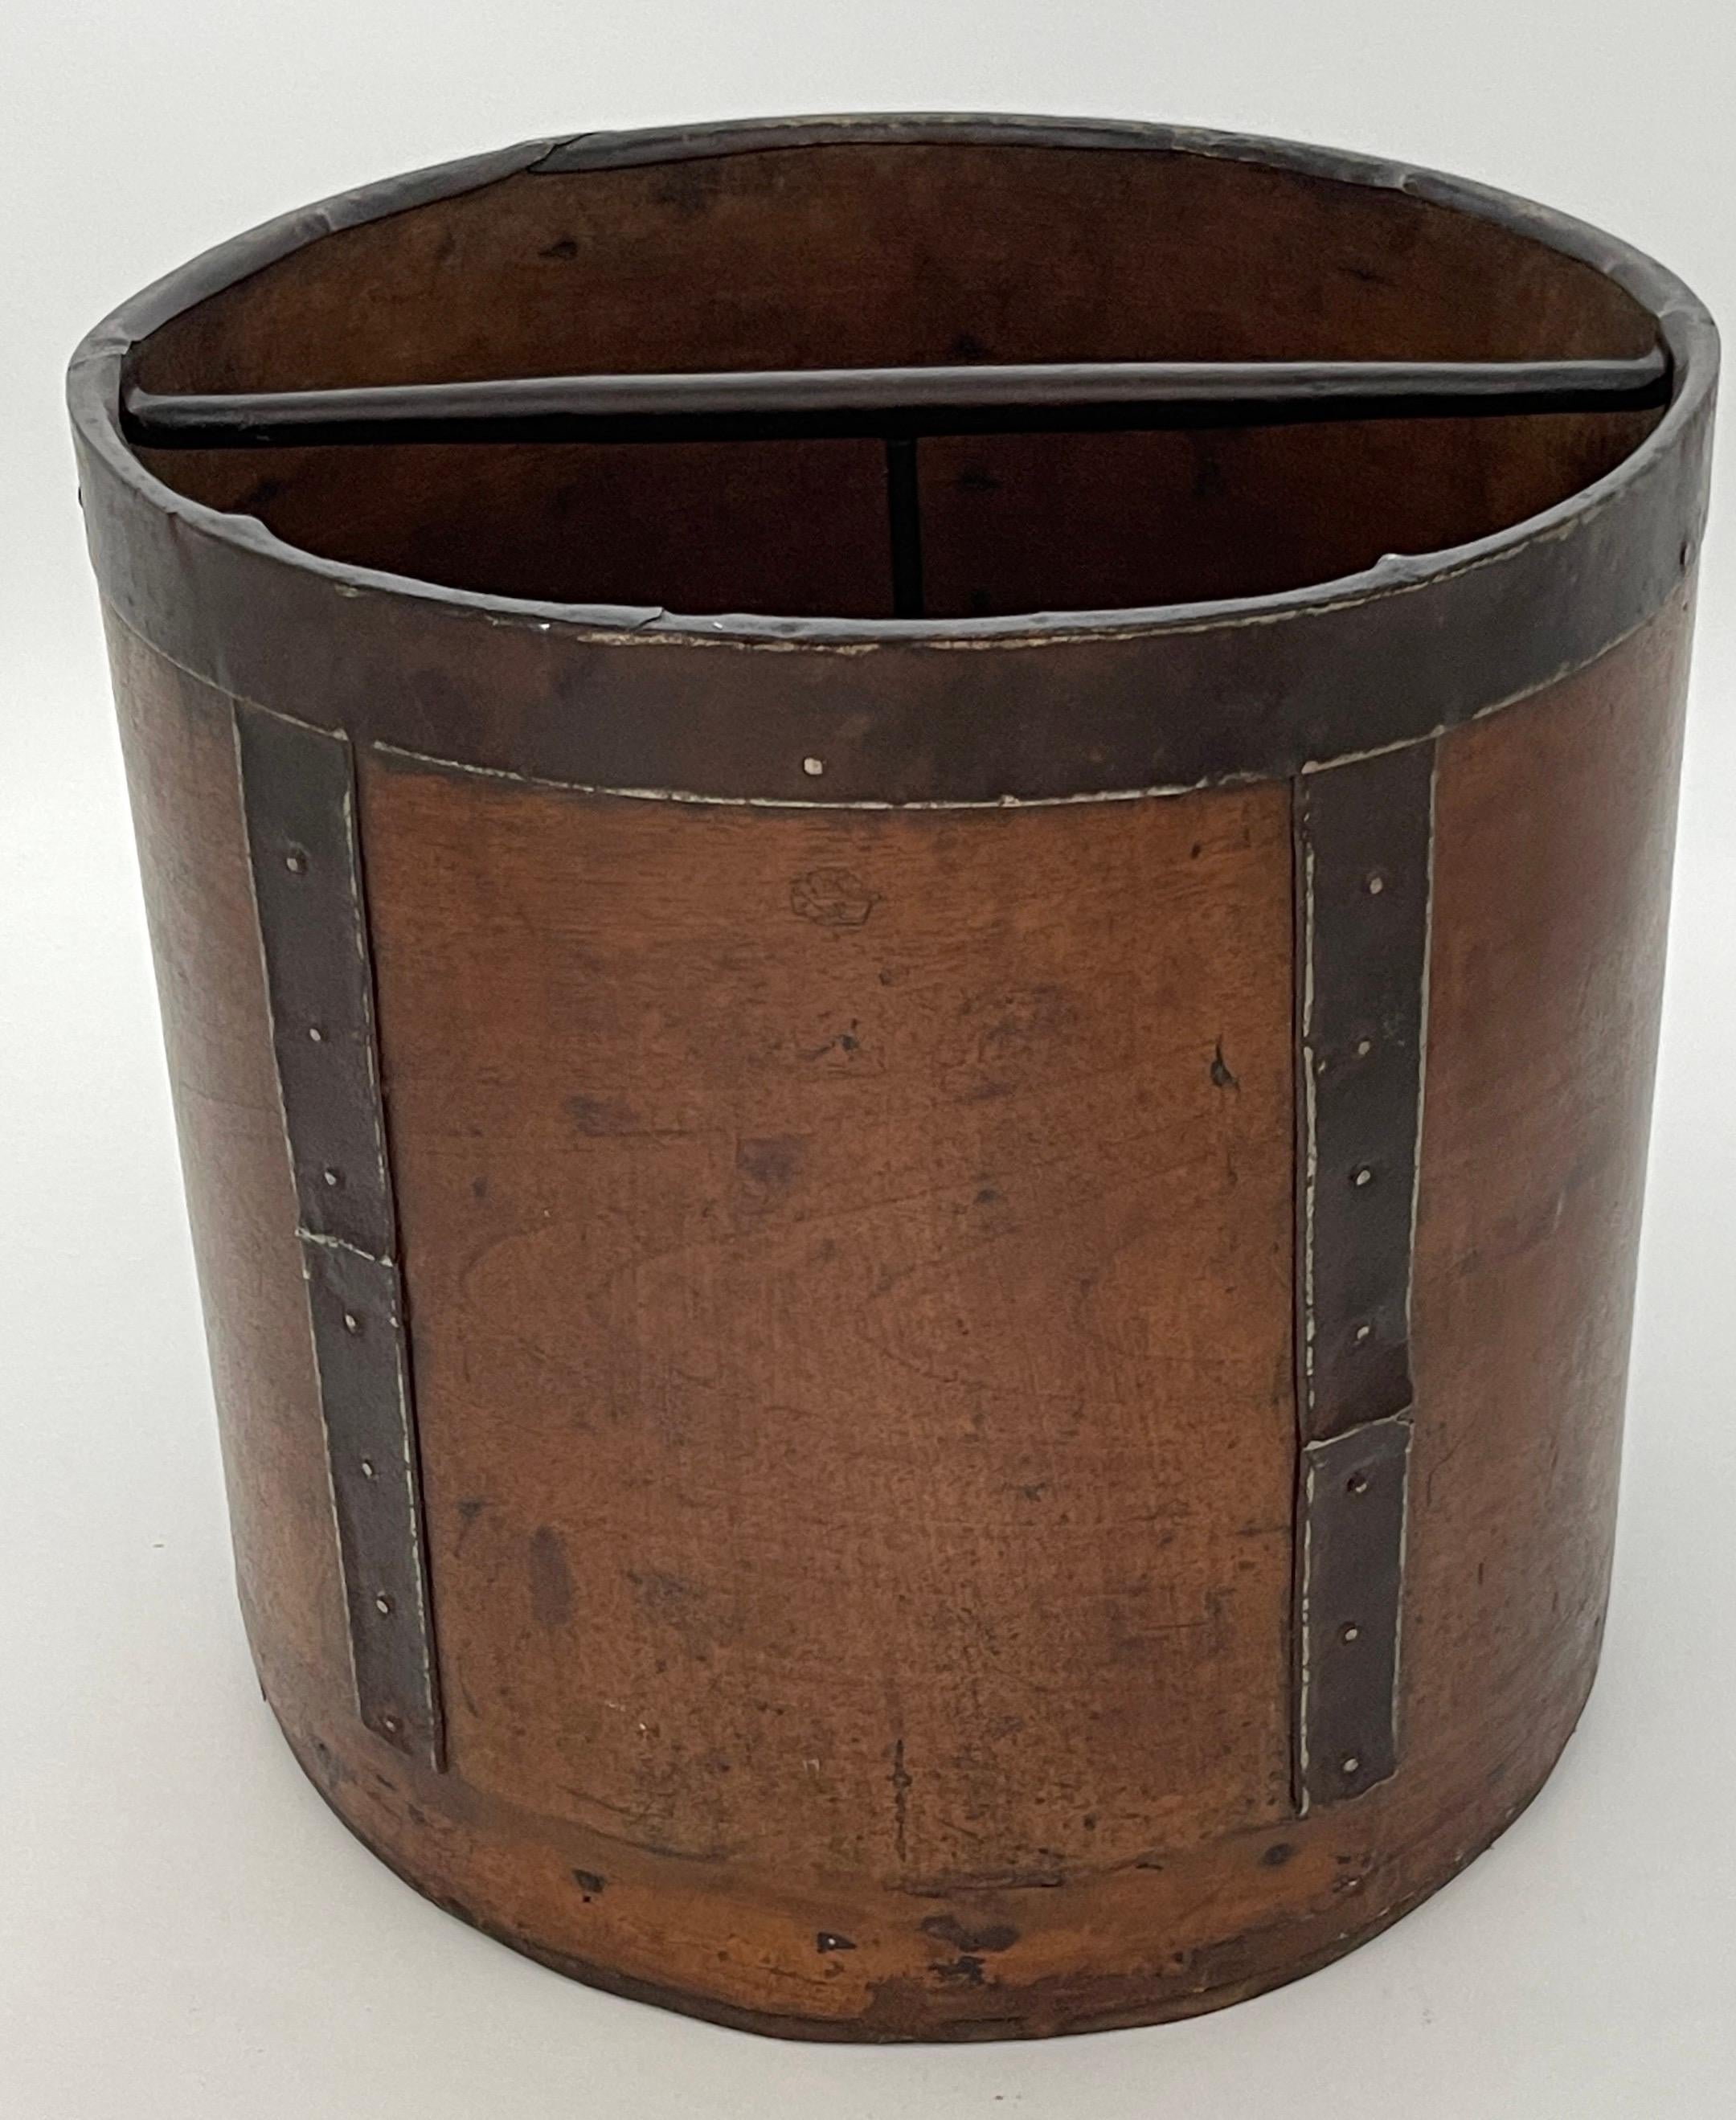 Antique Bentwood and Iron Circular Dry Measure - Wastepaper Basket / Trash Can
USA Circa 1890

We are offering the perfect blend of history and functionality with our antique bentwood and iron circular dry measure wastepaper basket/trash can.